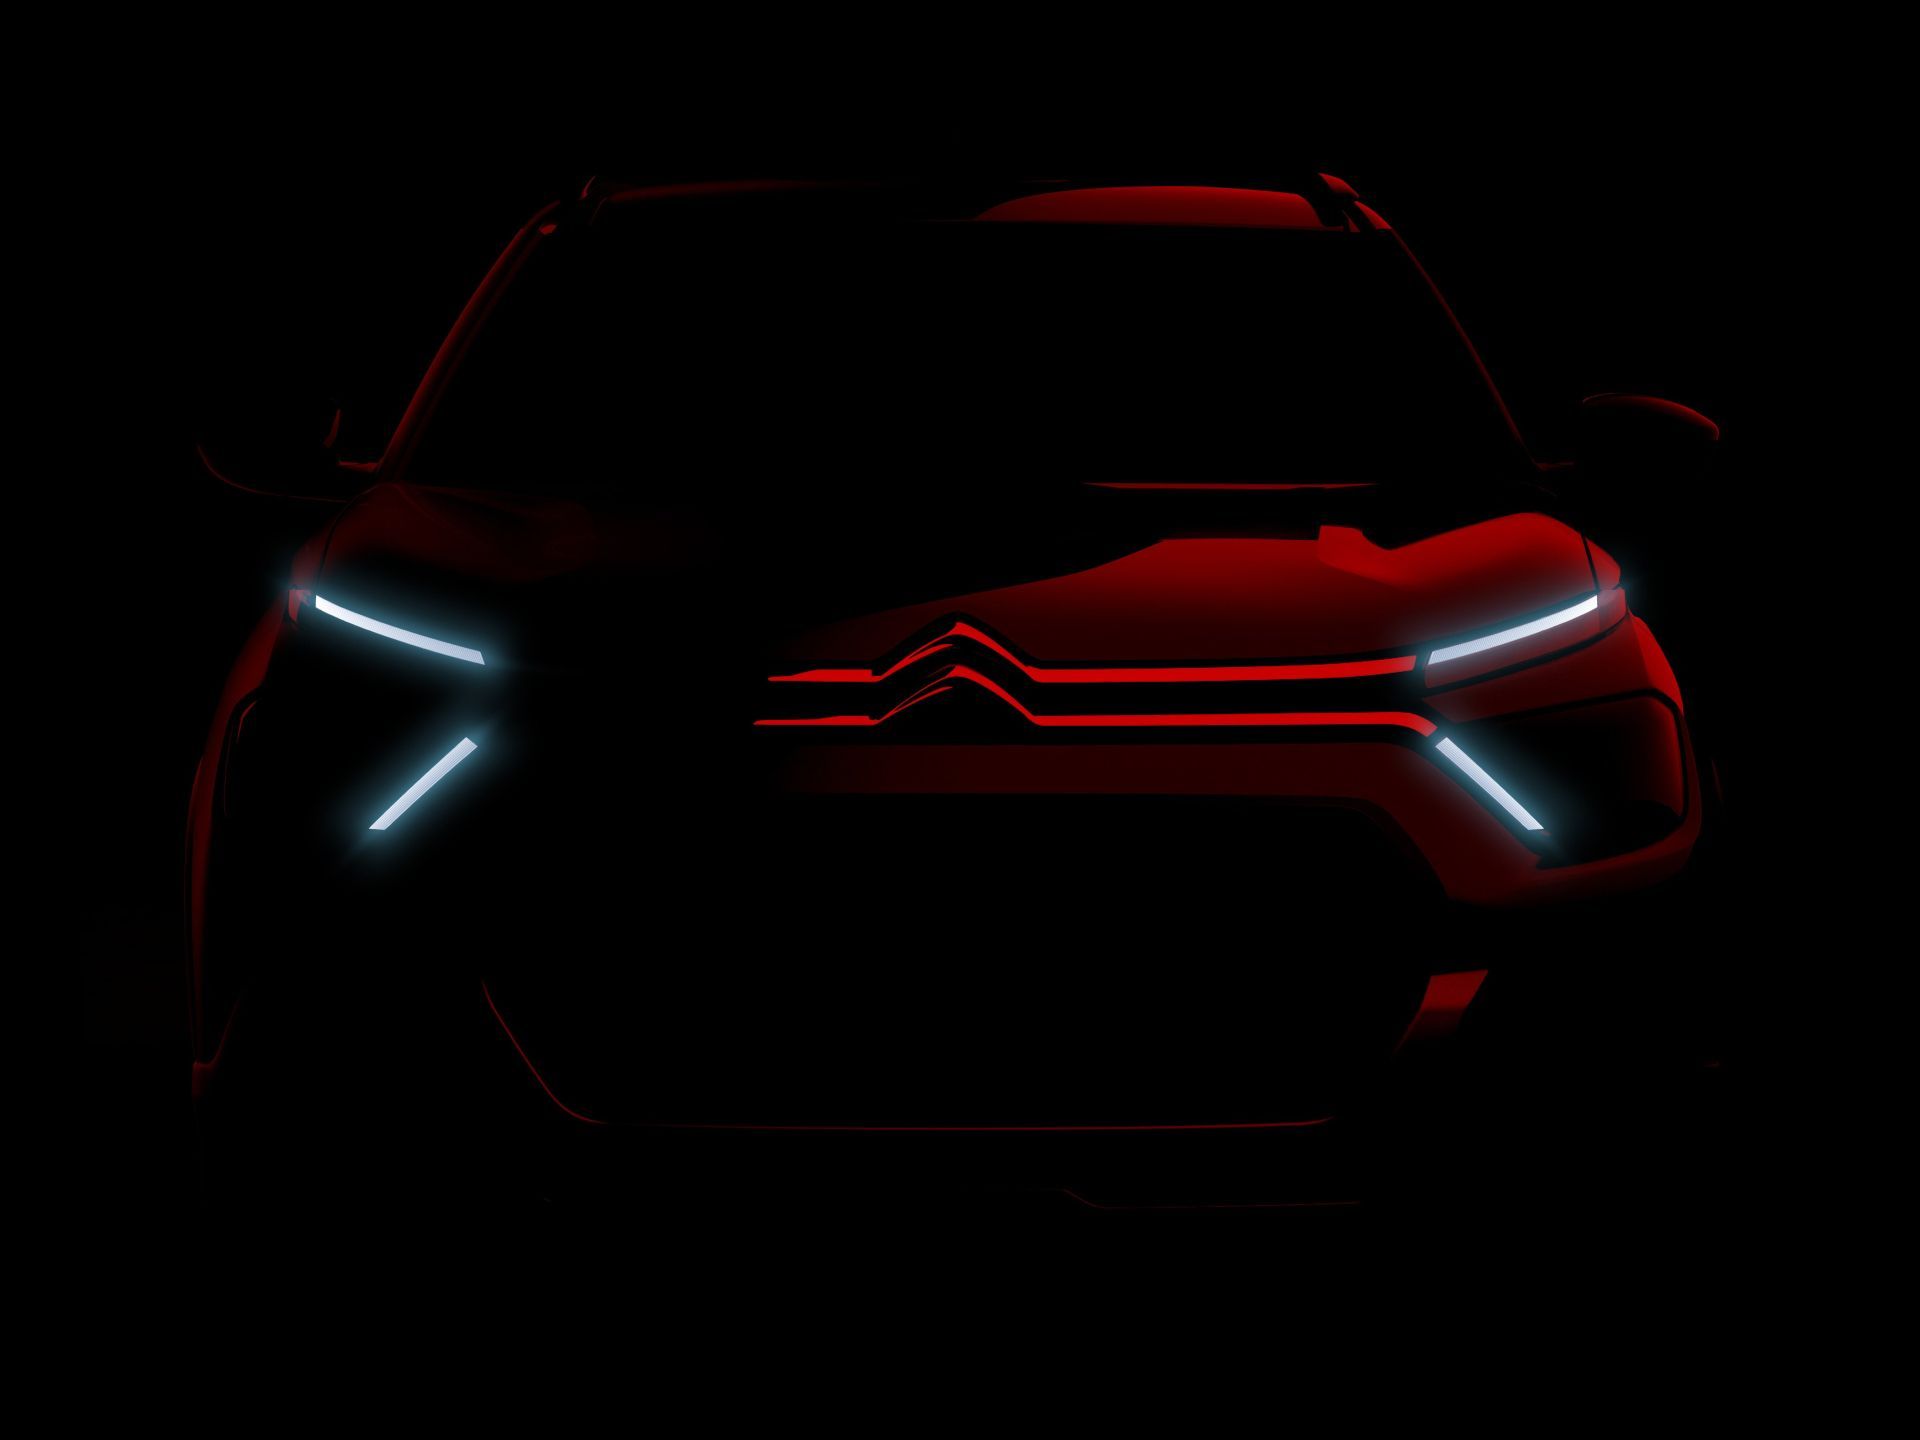 Citroen's Kia Sonet Rival Teased For The First Time Ahead Of Its September 16 Debut - Zigwheels